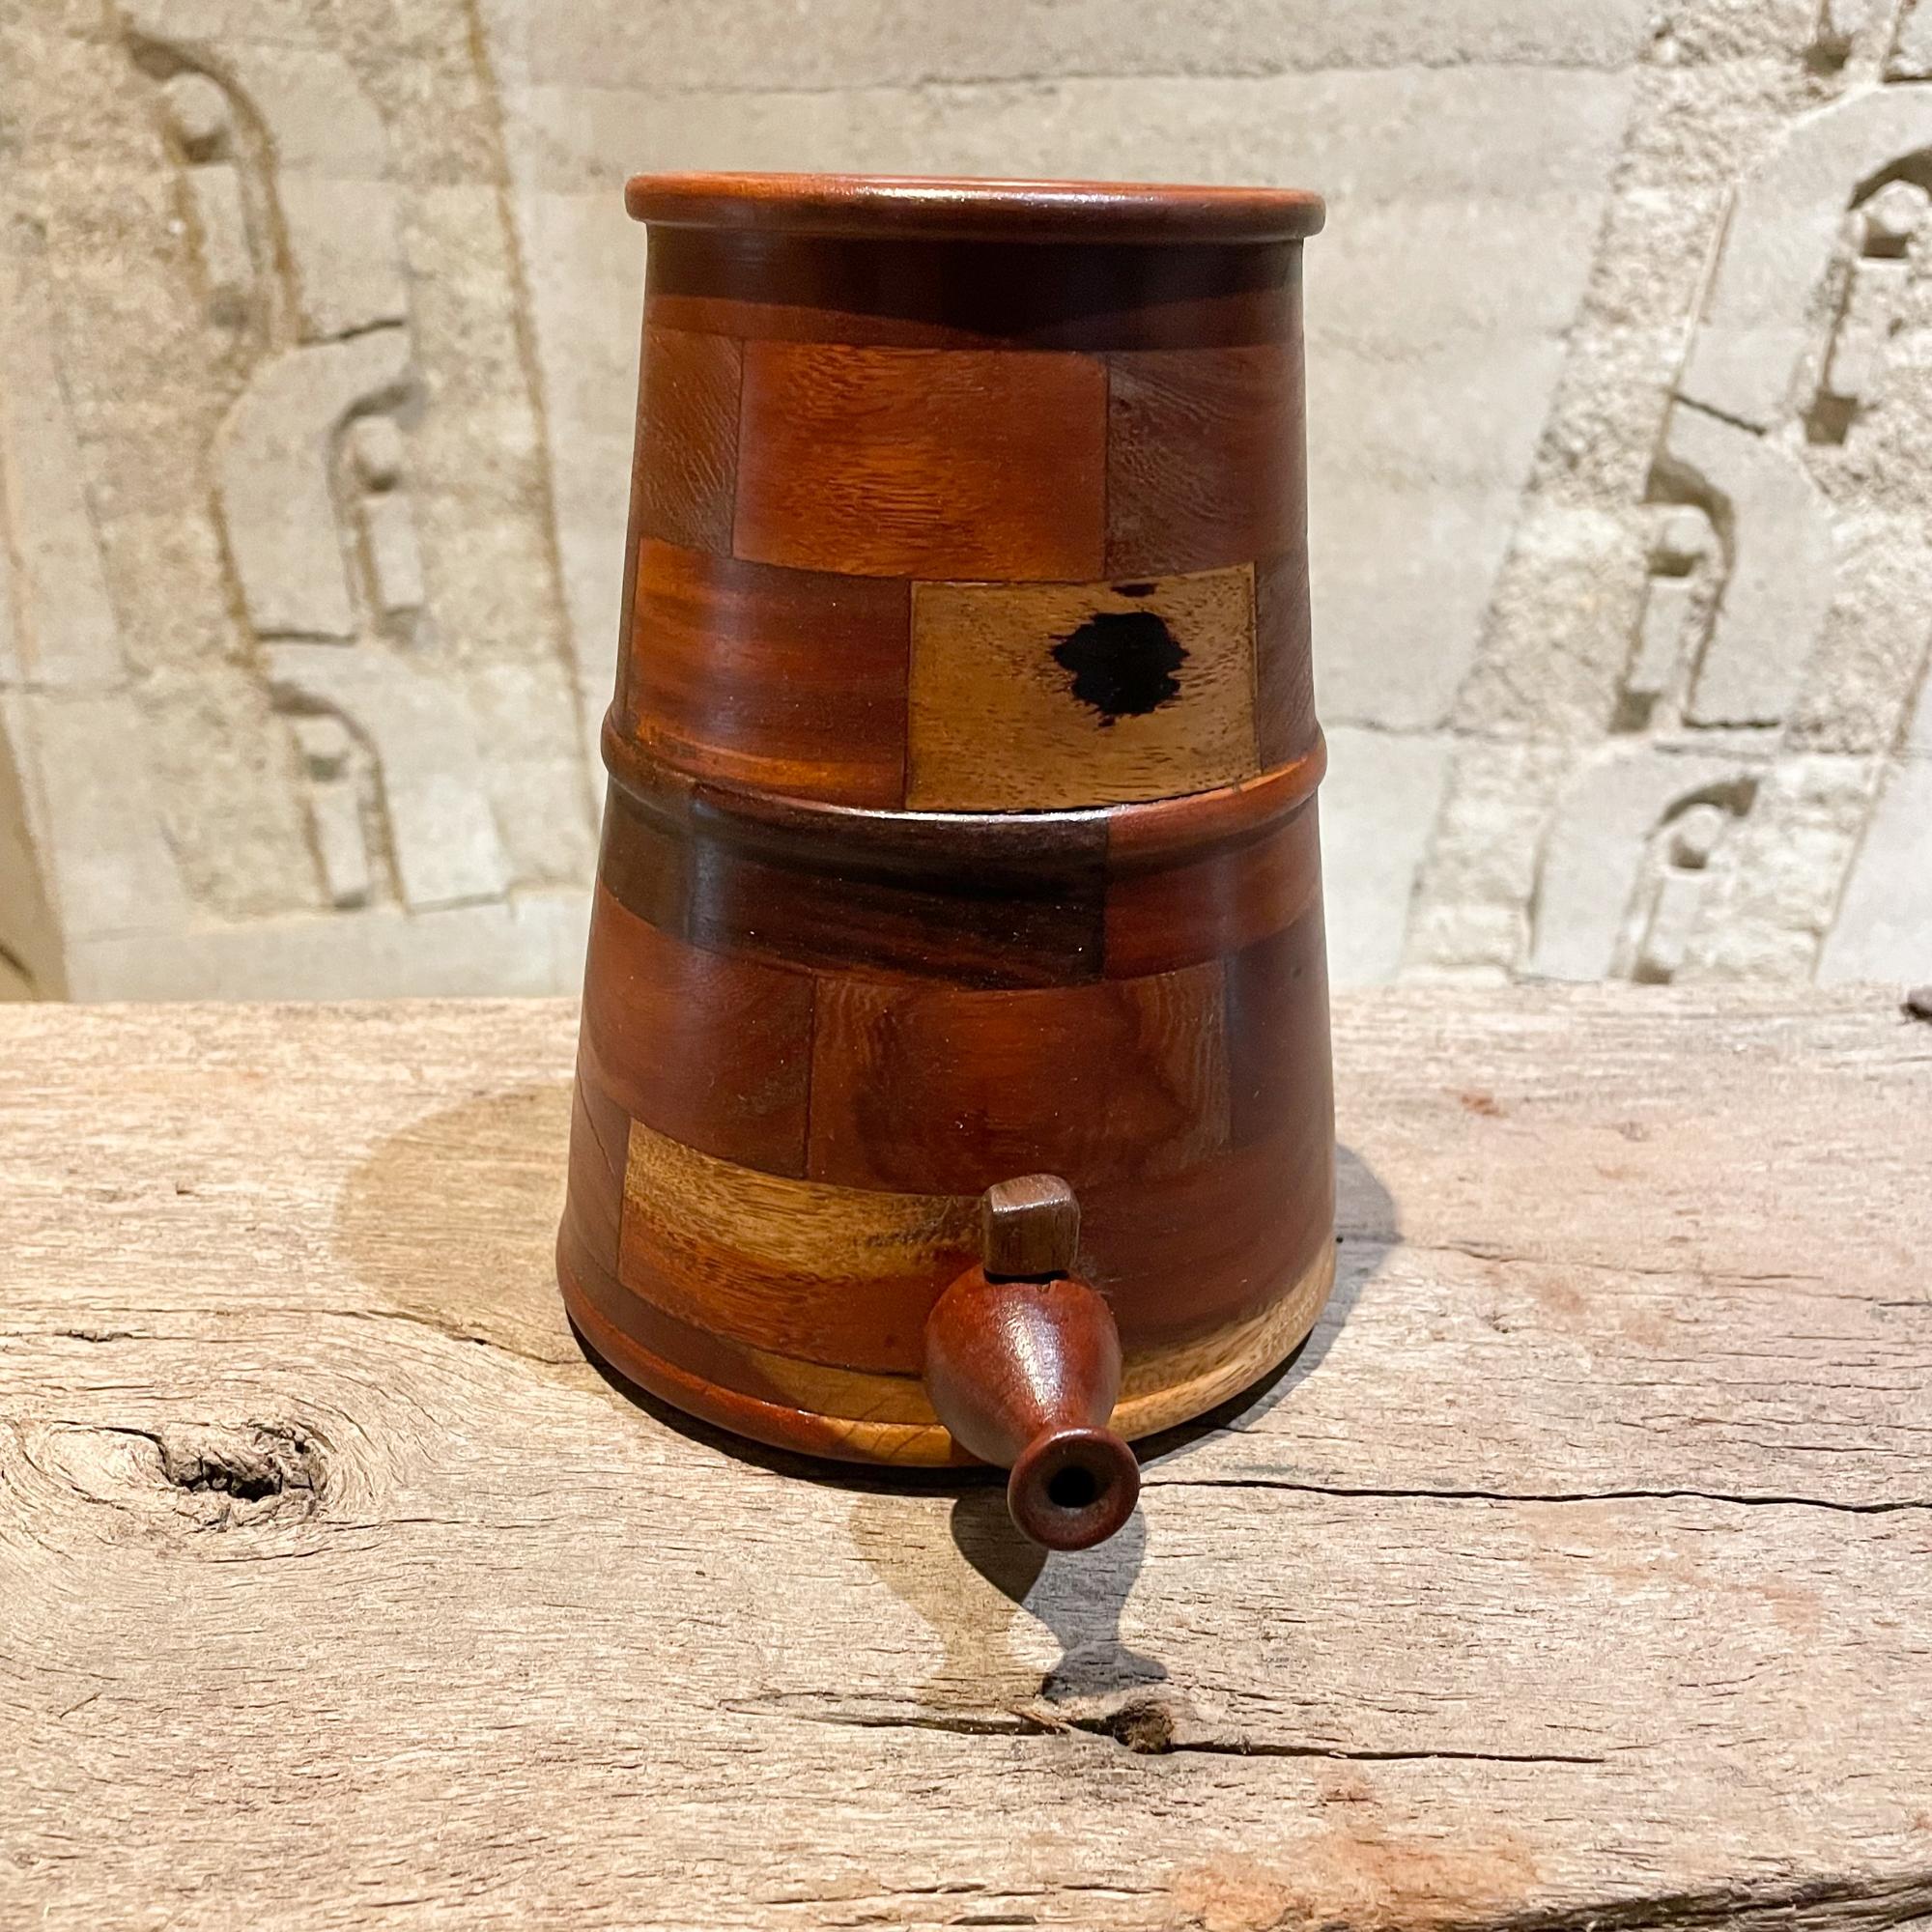 Mid-Century Modern Personal Water Cooler Dispenser in Turned Wood Don Shoemaker 1970s Modern Mexico